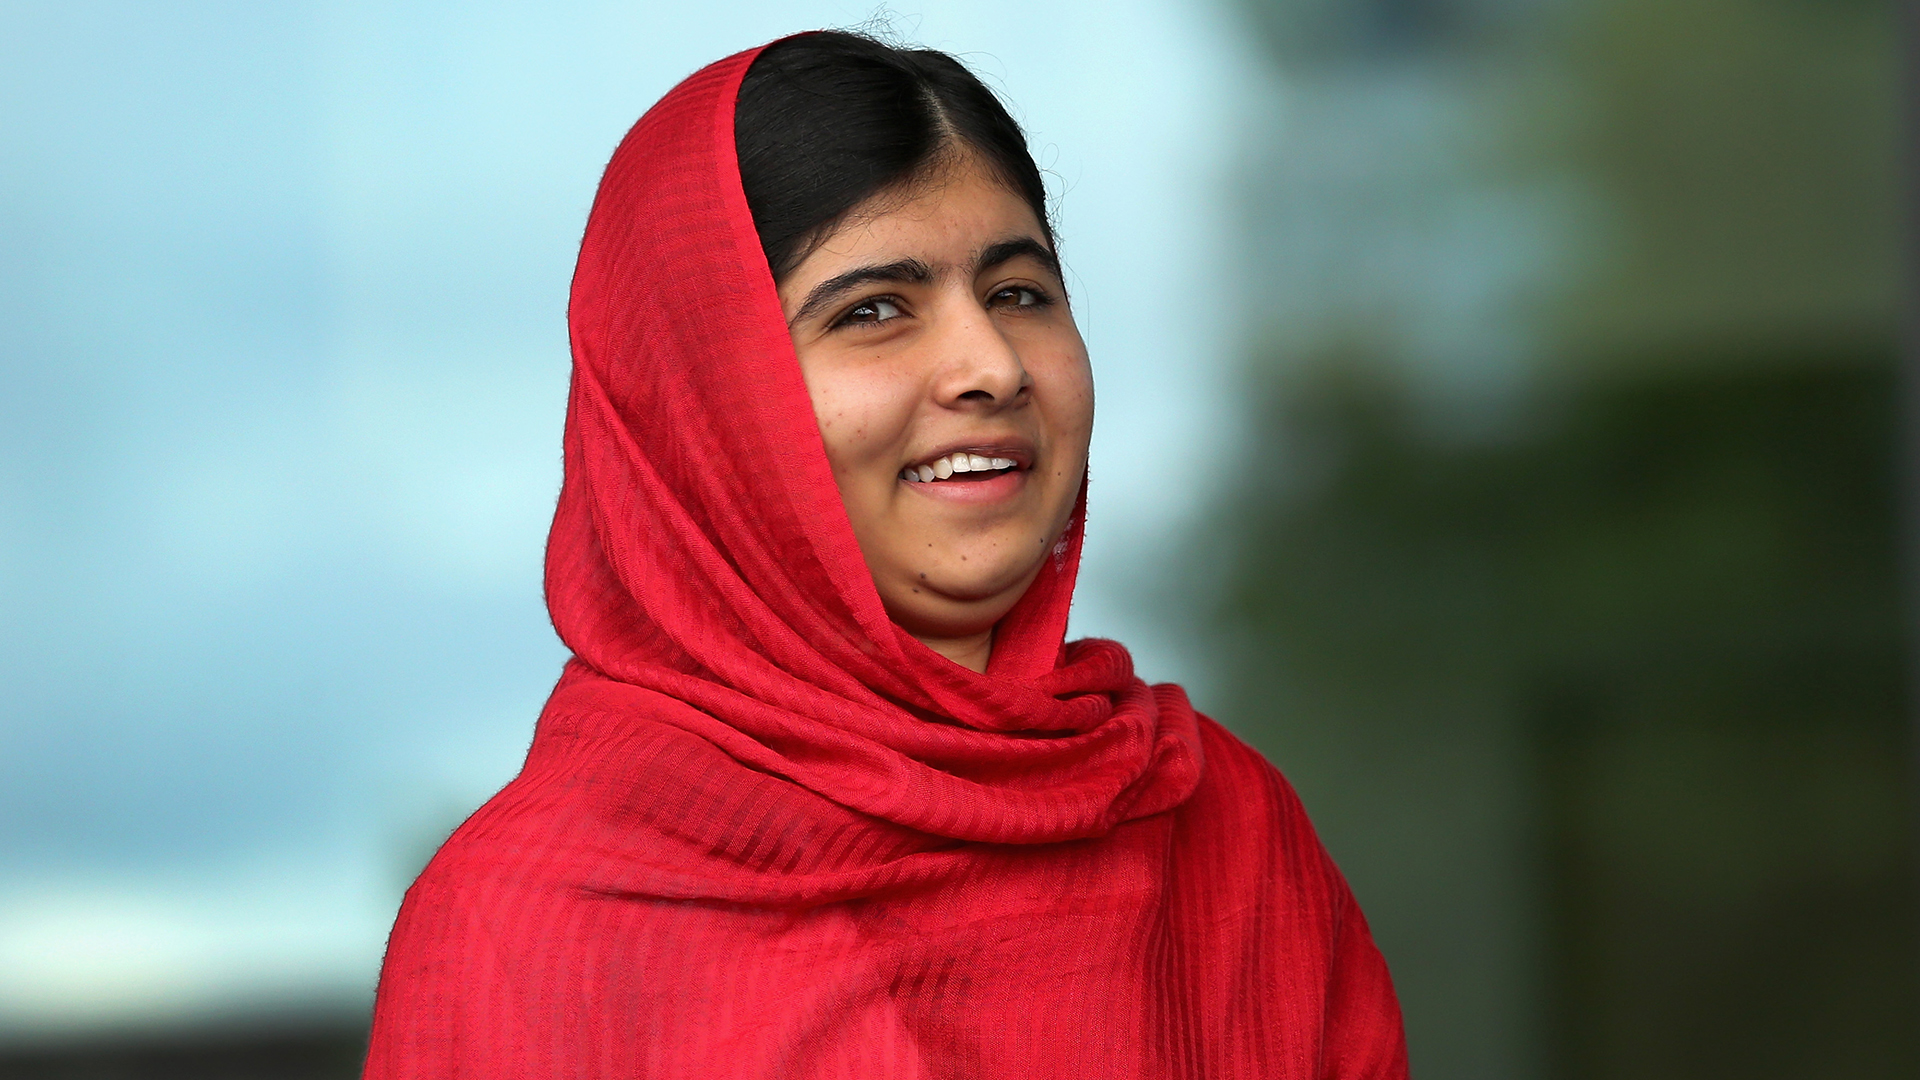 17-year-old Malala shares Nobel Peace Prize - TODAY.com